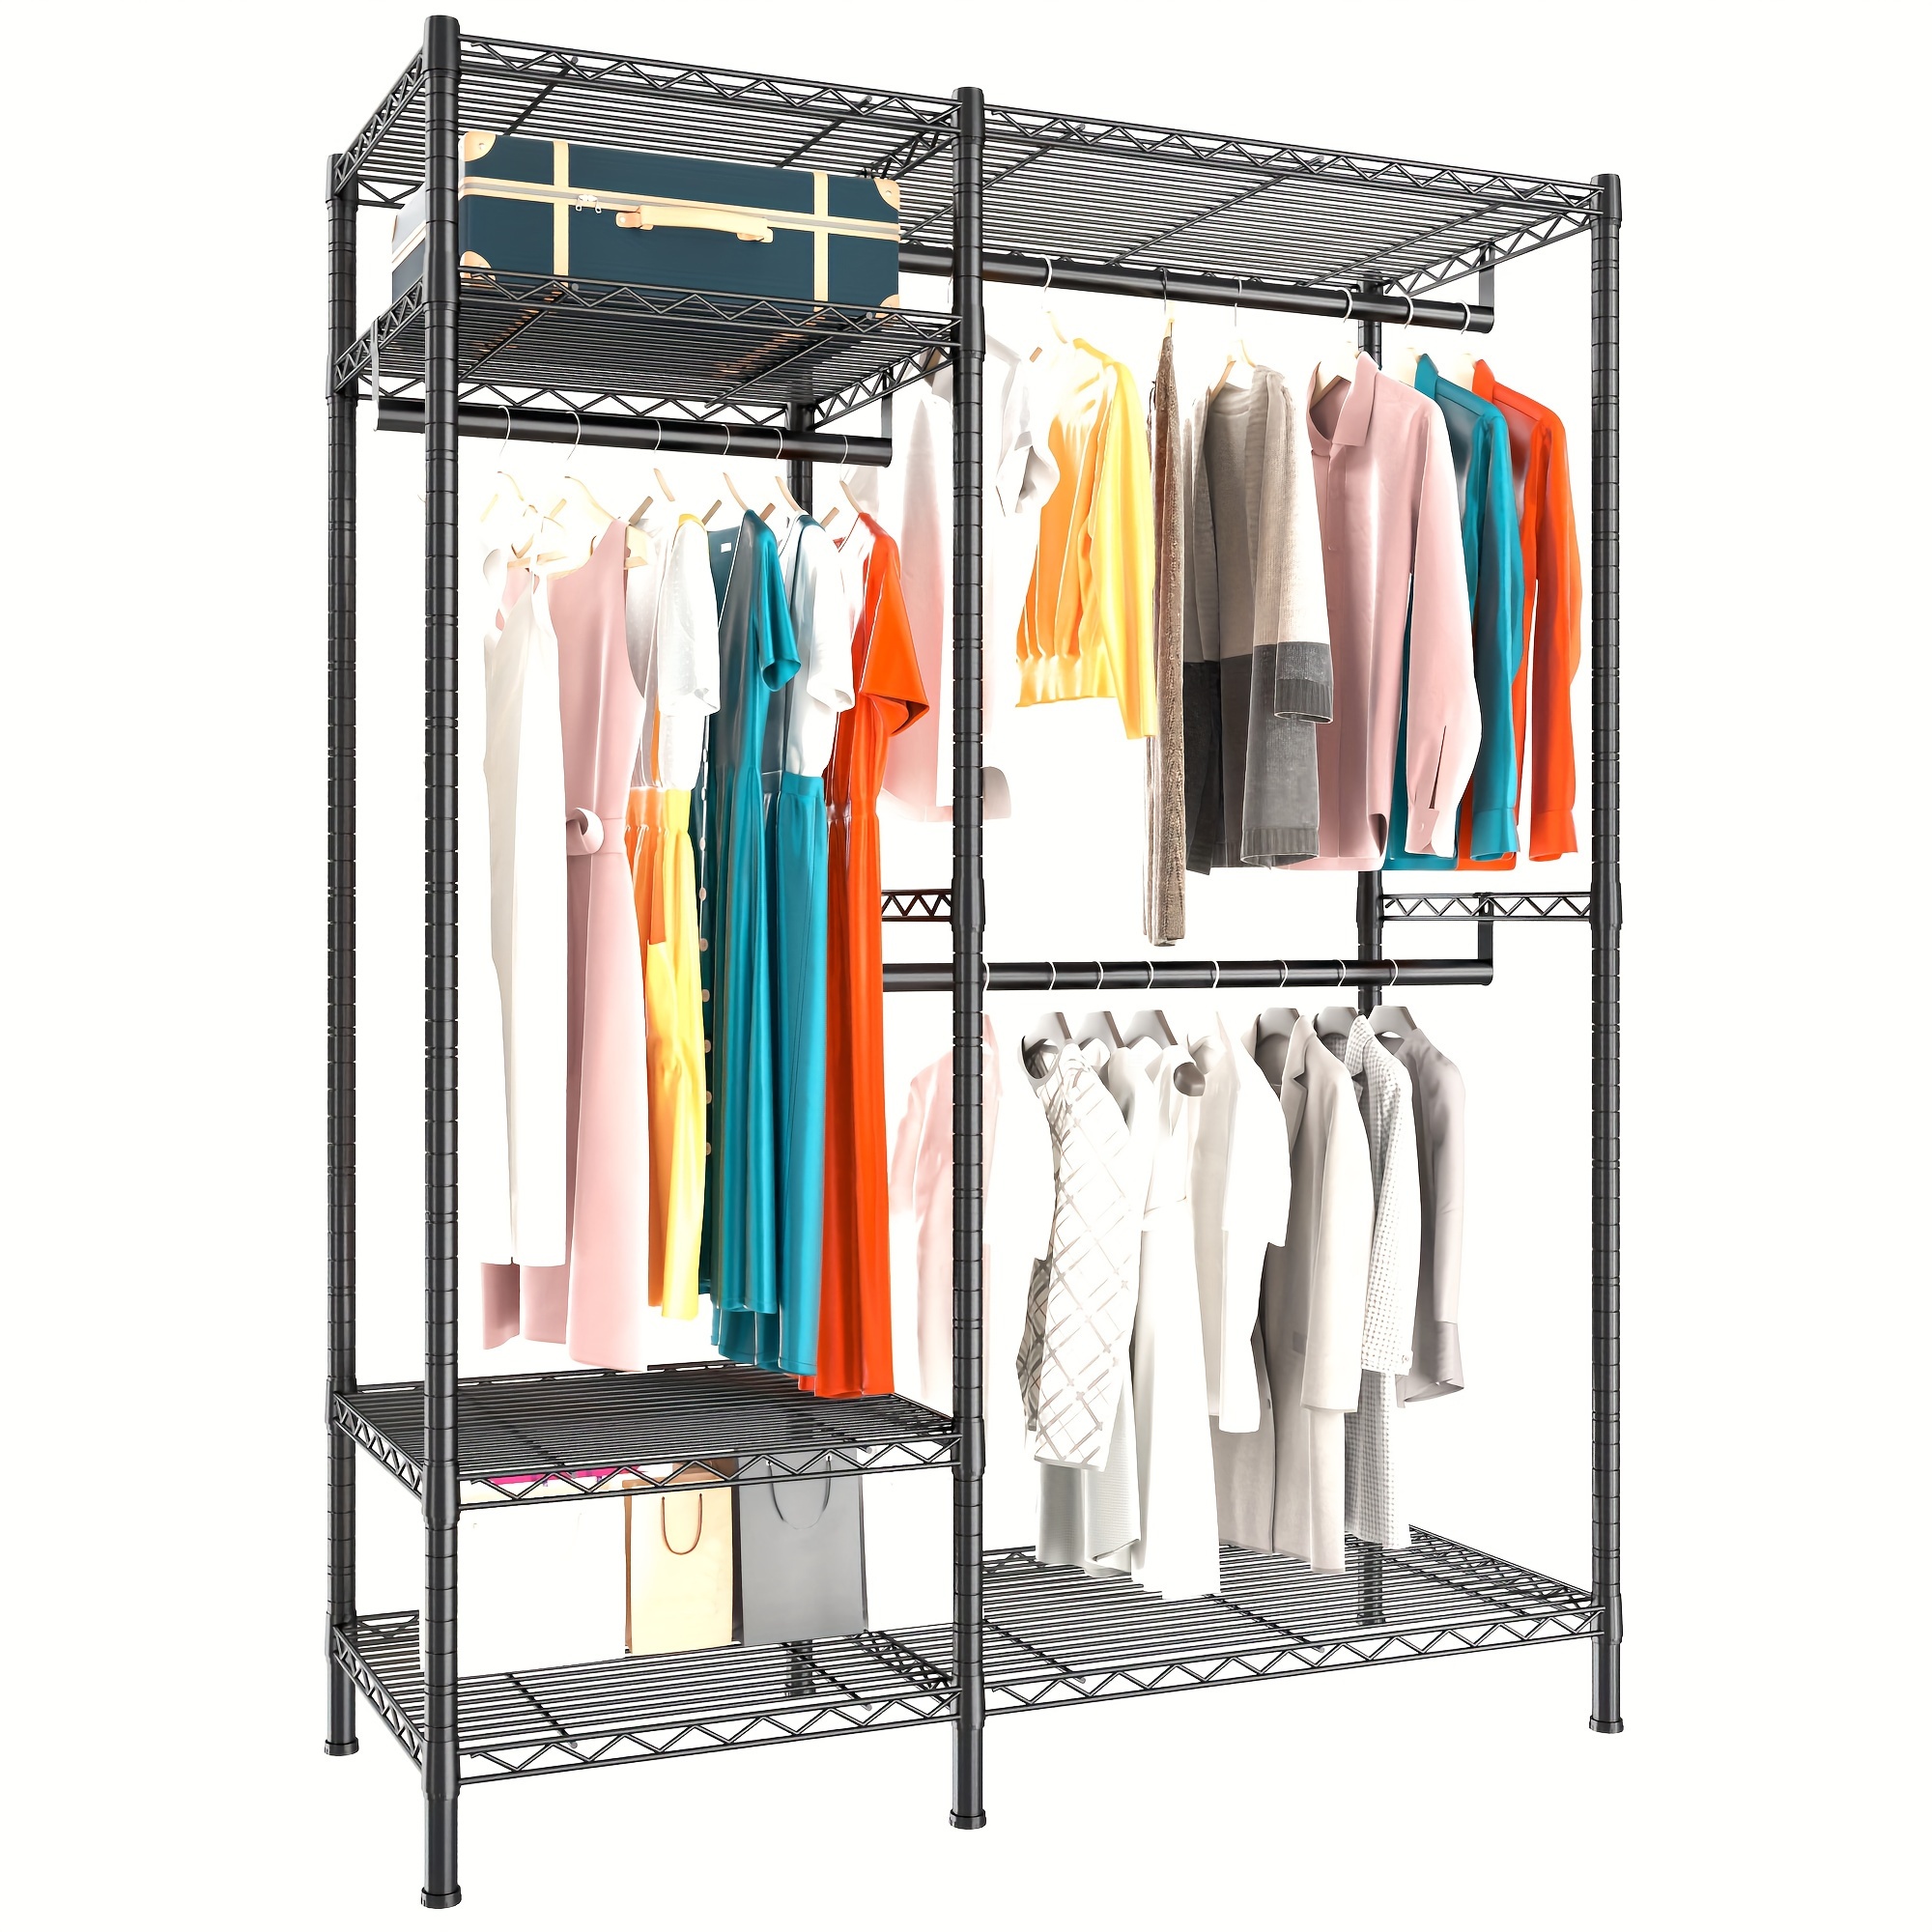 

Clothes Rack Clothing Rack 705 Lbs Clothing Racks For Hanging Clothes Portable Wadrobe Closet Heavy Duty Clothes Rack Adjustable Wire Garment Rack 45.5" W X 16.8" D X 77.1" H Balck